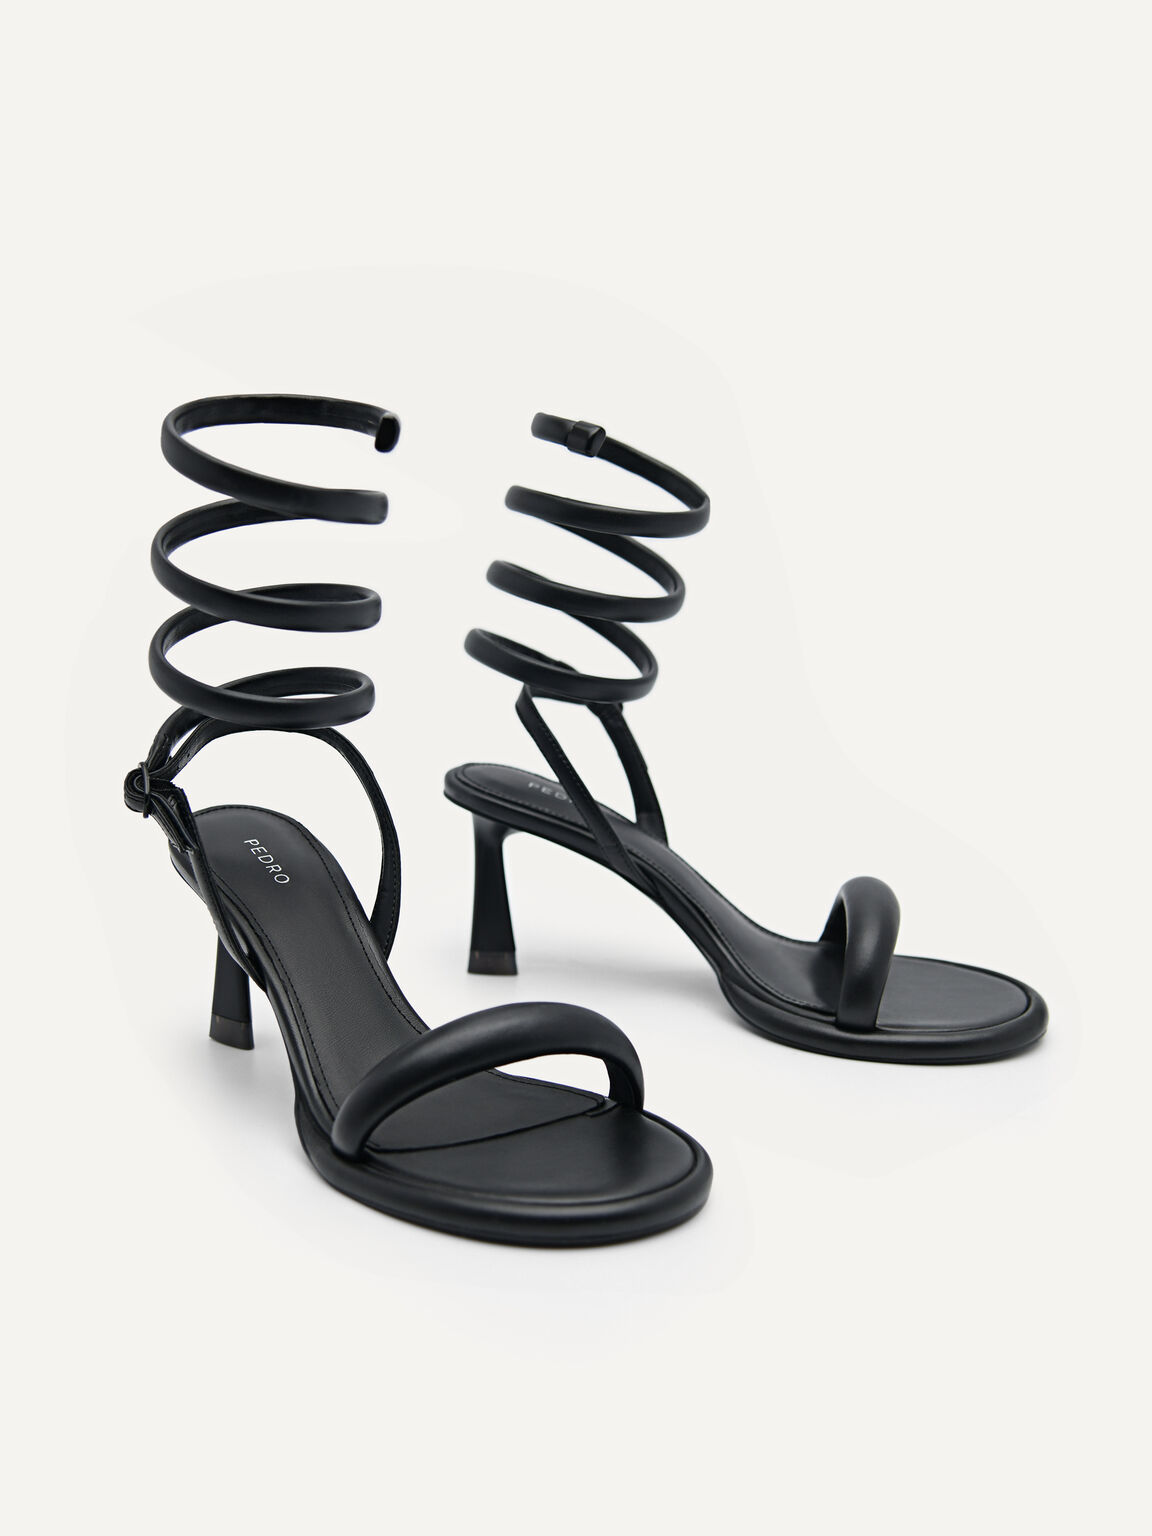 Terrazo Heels with Detachable Coil Strap, Black